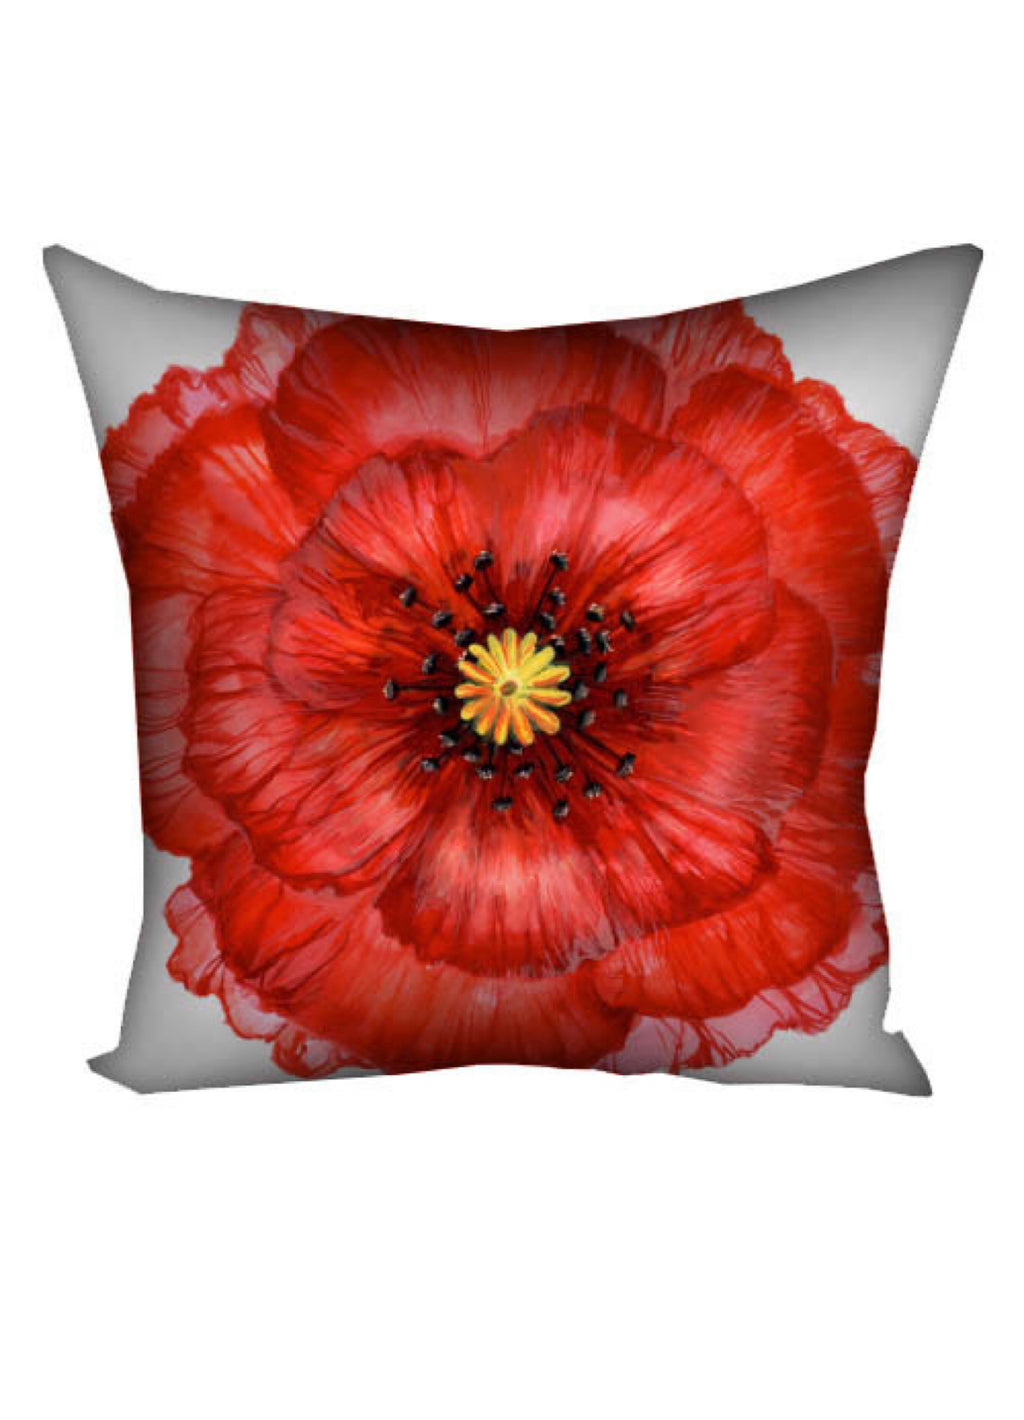 Decorative Pillow “Red Poppy”